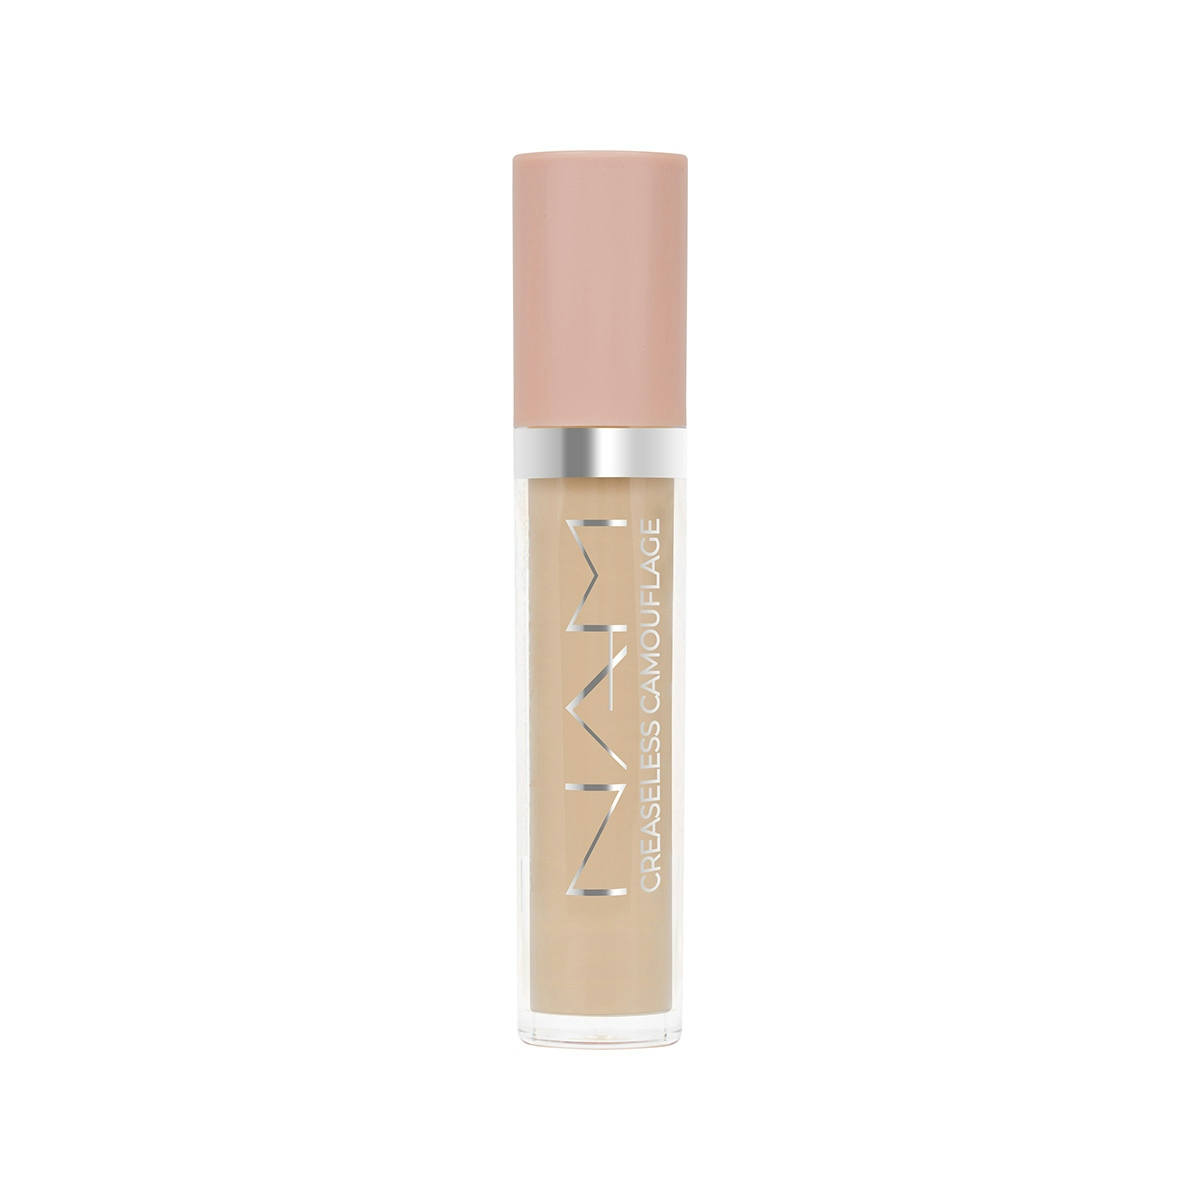 Corrector Creaseless Camouflage 08N - Sunkissed NAM 1 ud